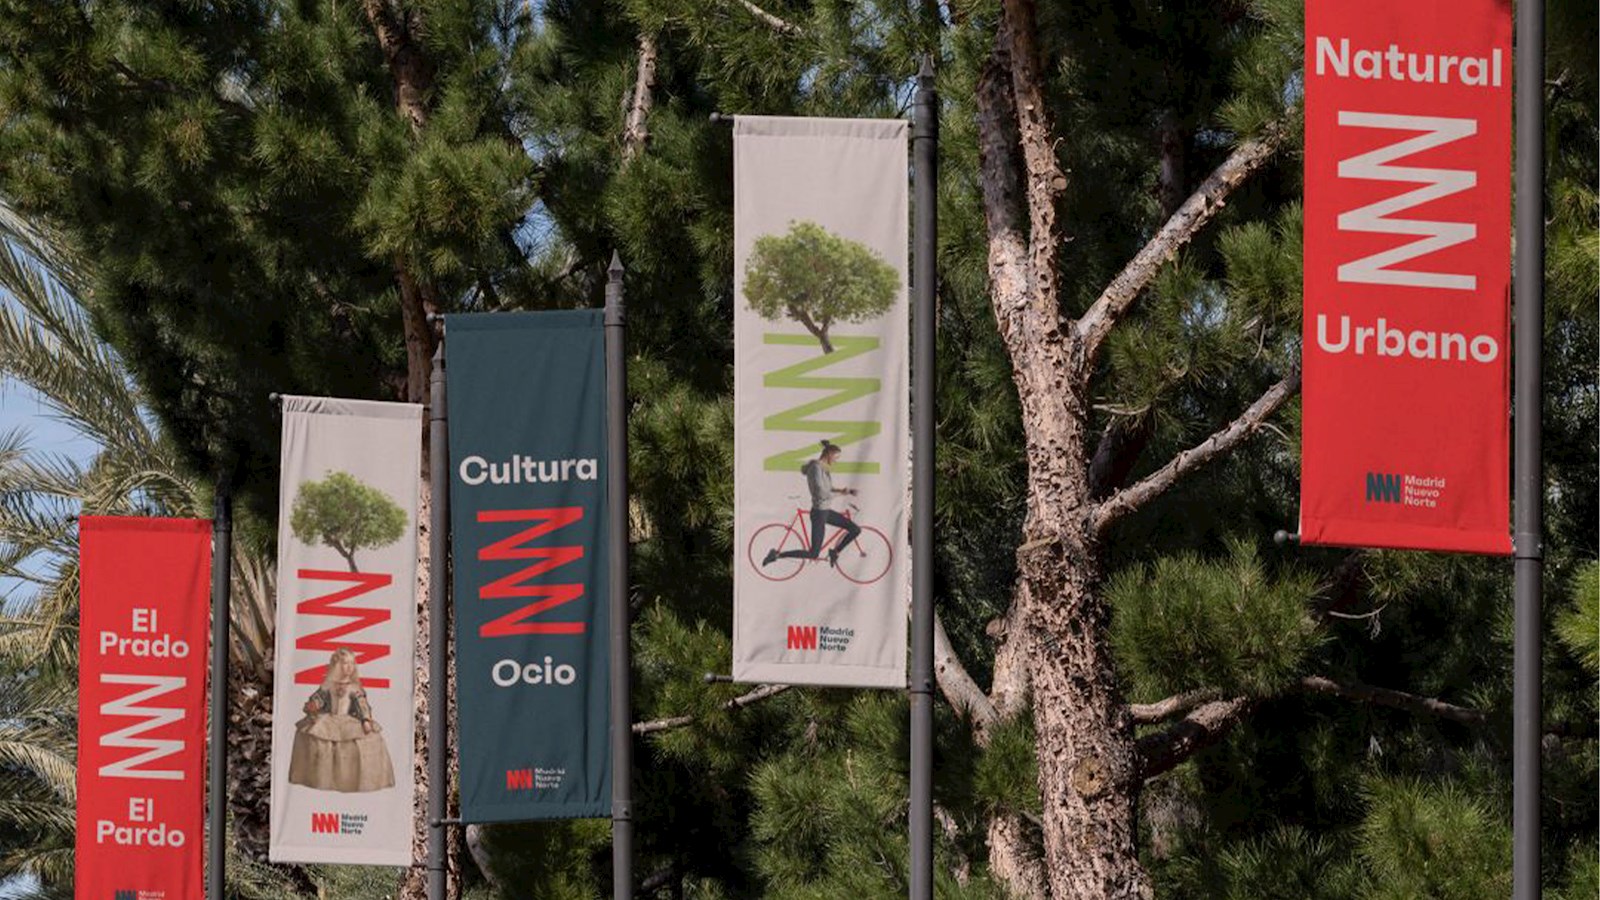 Flags showing the images from the Madrid rebrand